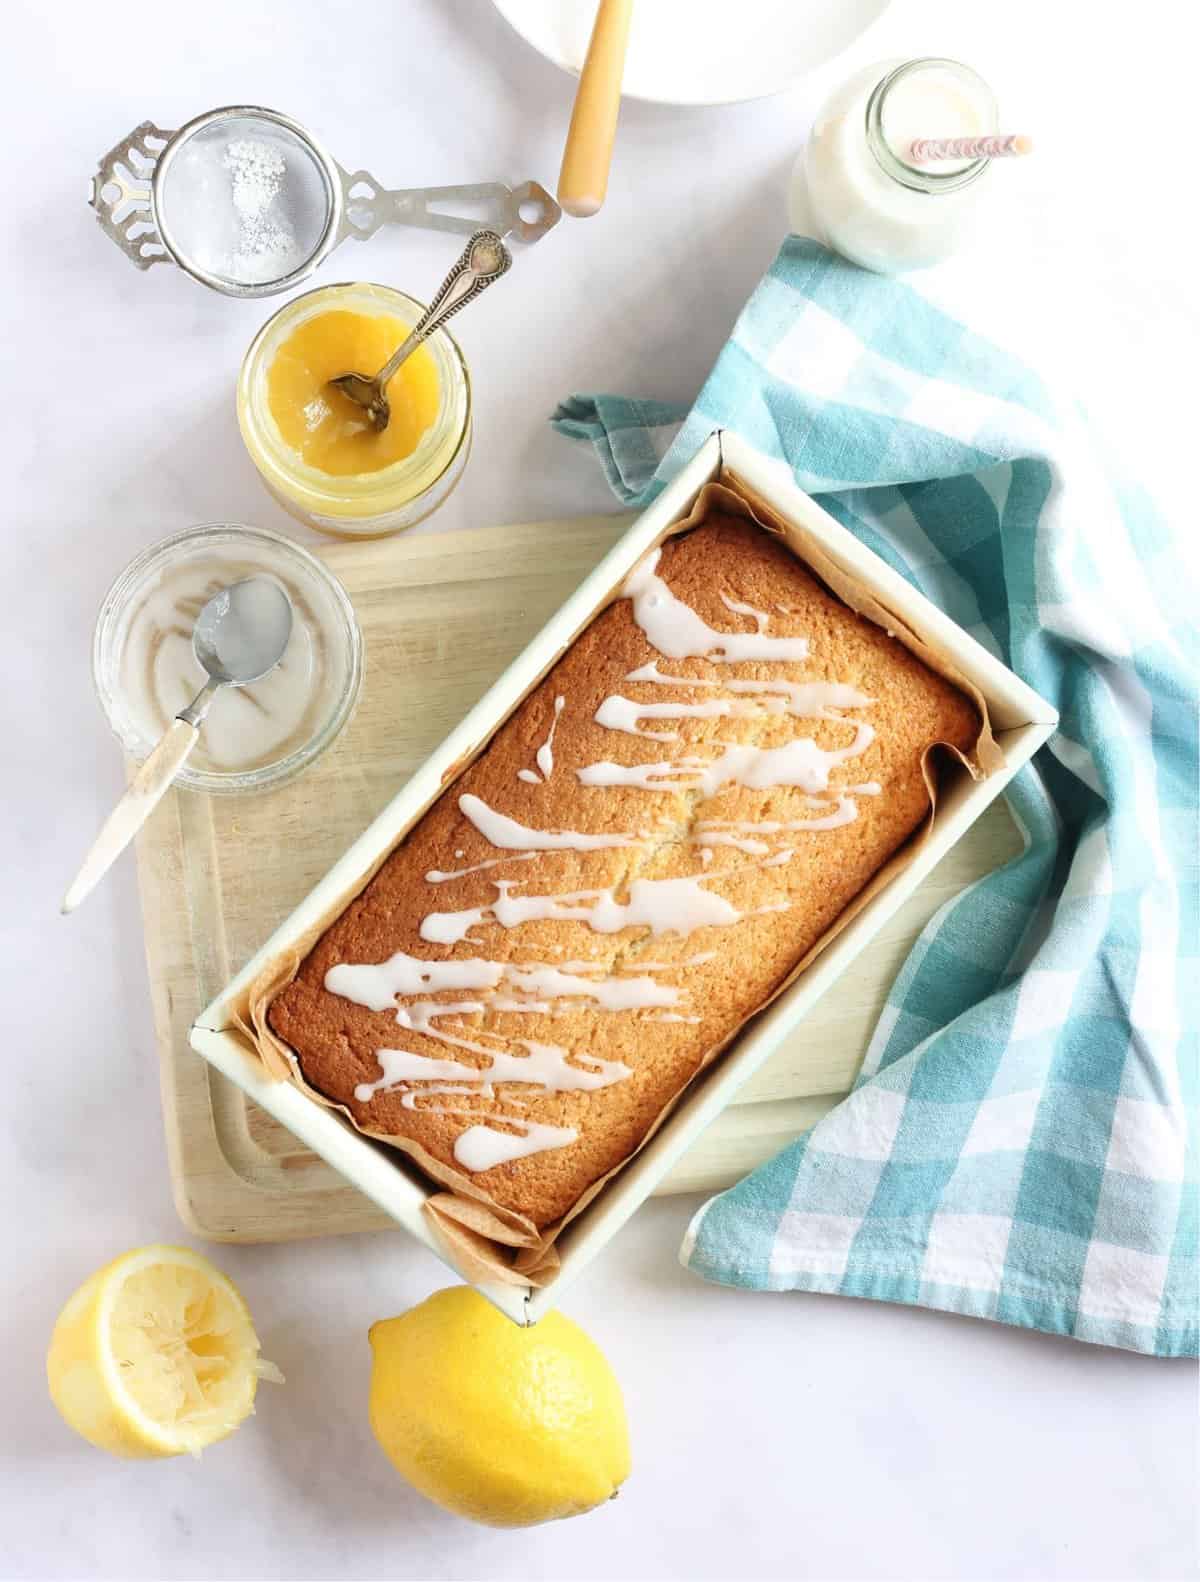 Lemon curd loaf cake in a green loaf tin being drizzled with a lemon icing.